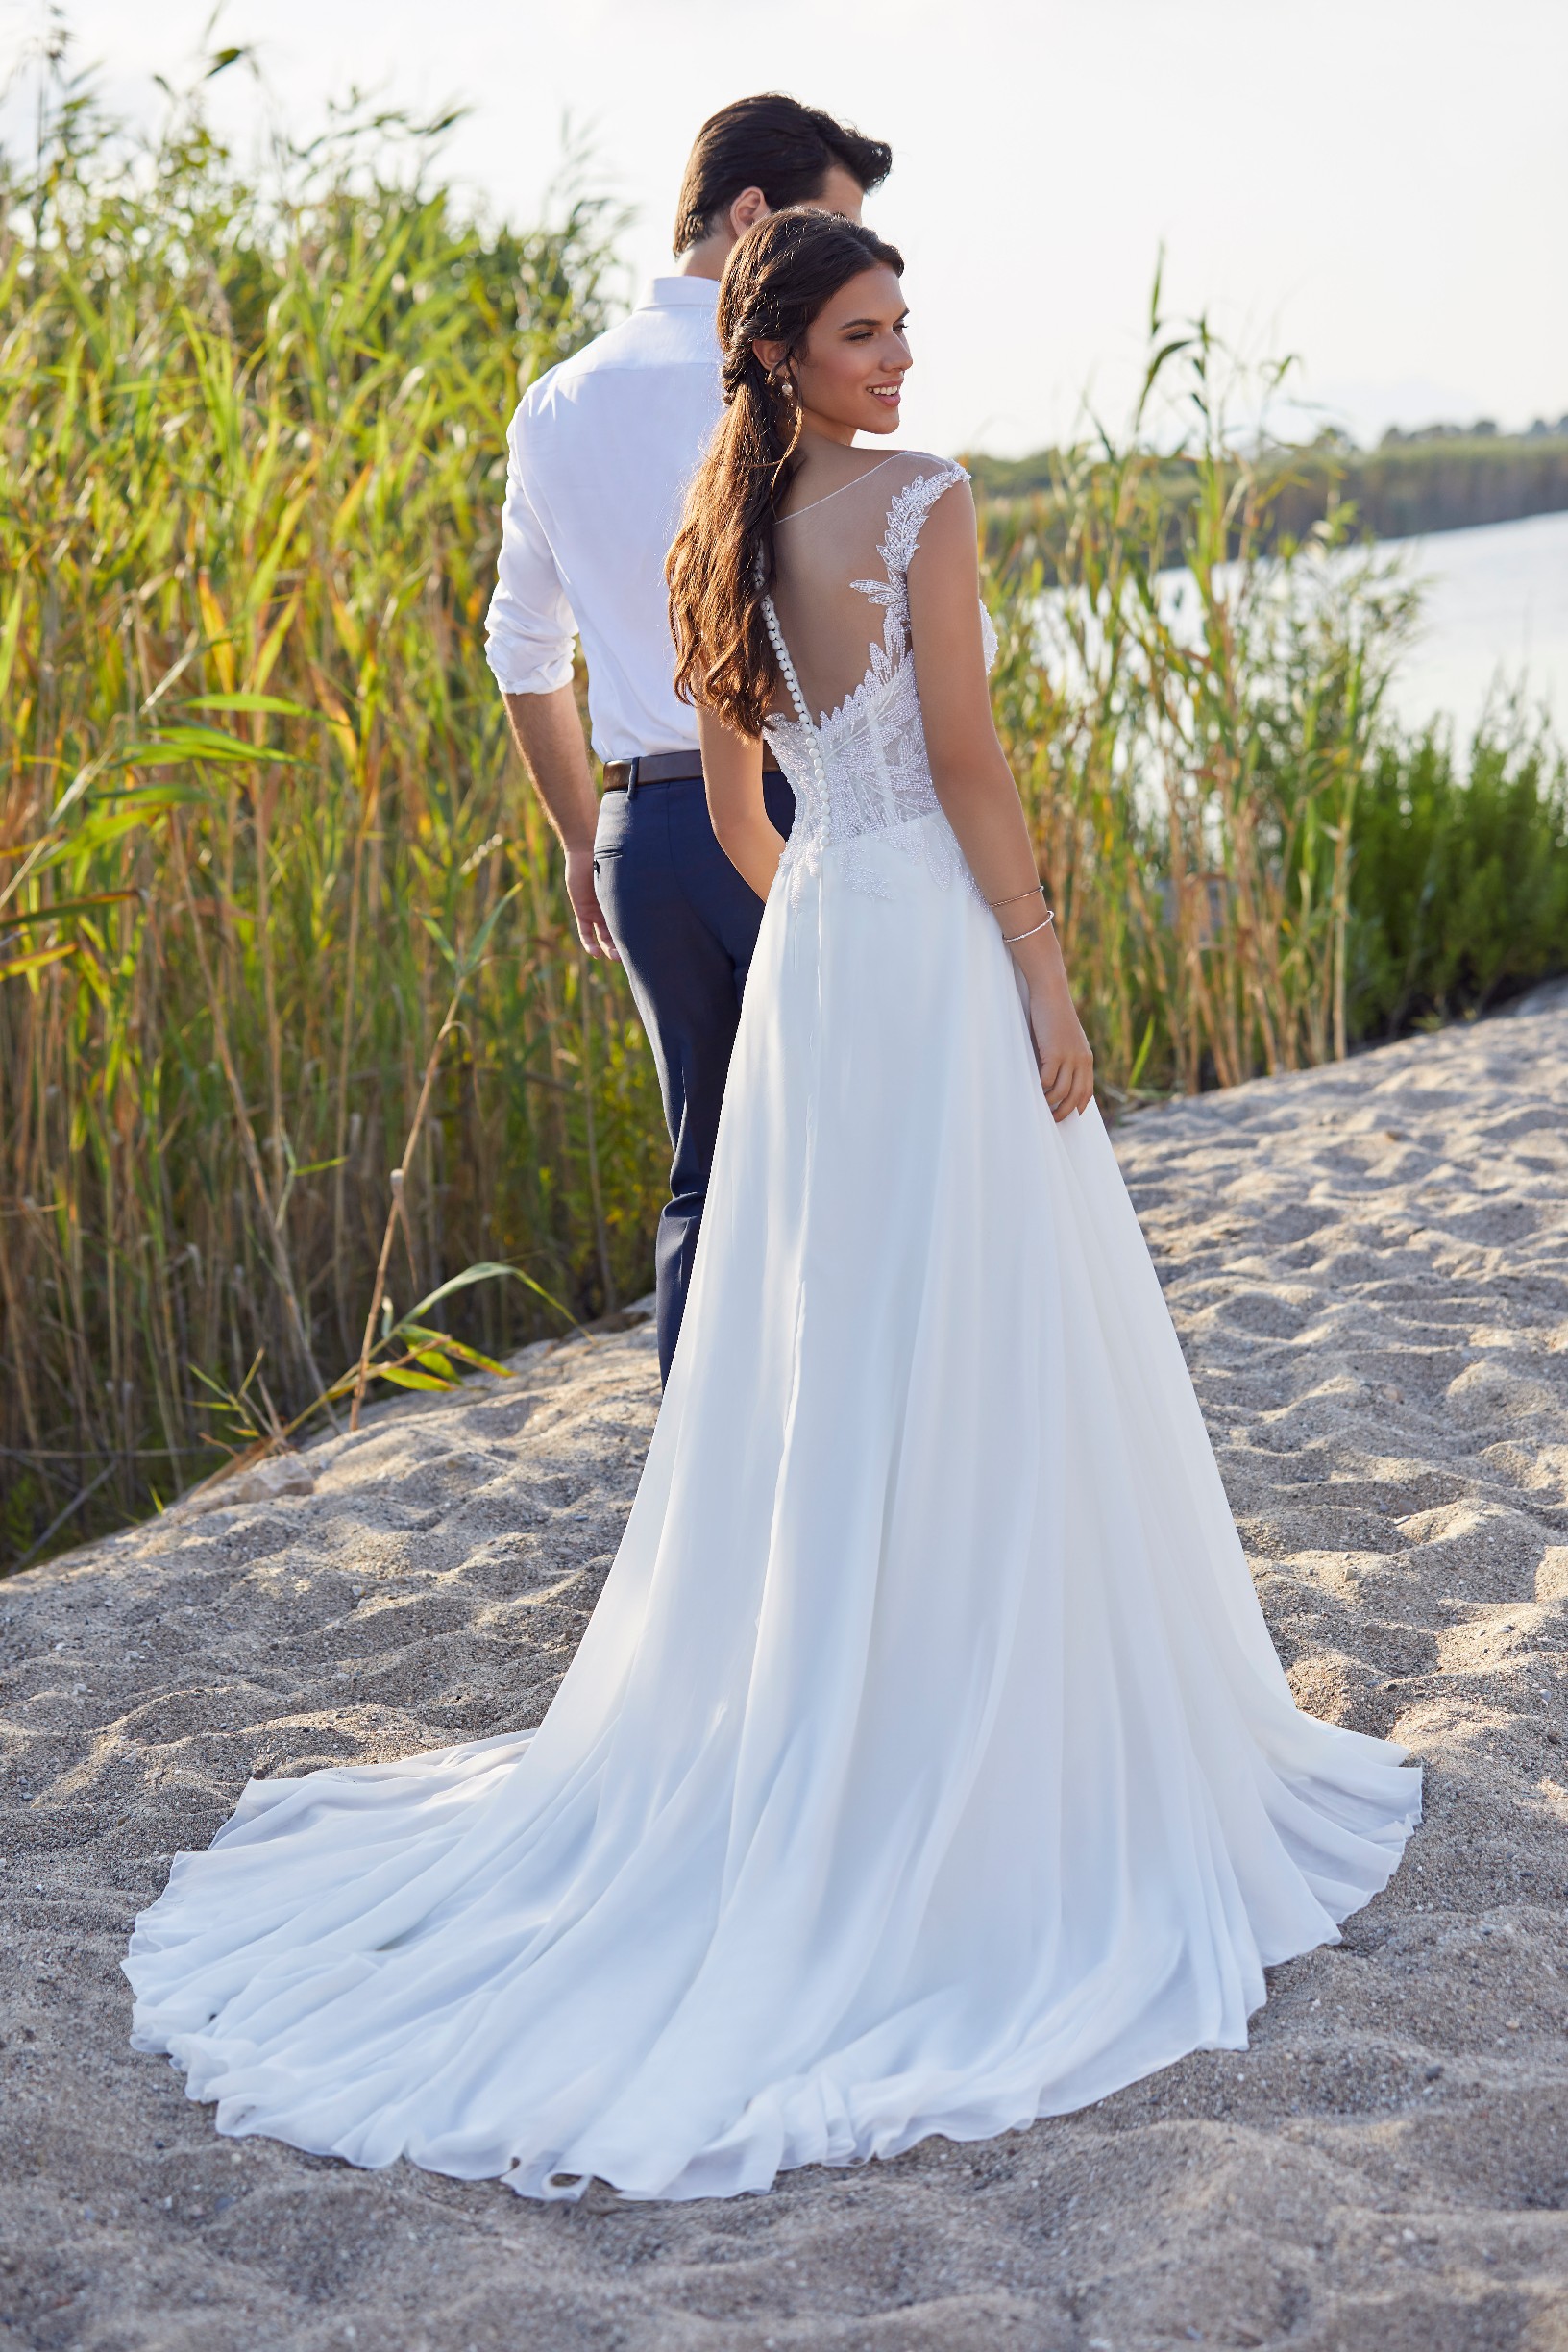 The back of a bride and groom stood by beach reeds. Bride wears Ronald Joyce 18413, a white A-line wedding dress with an illusion buttoned back, plain skirt and beaded tulle bodice